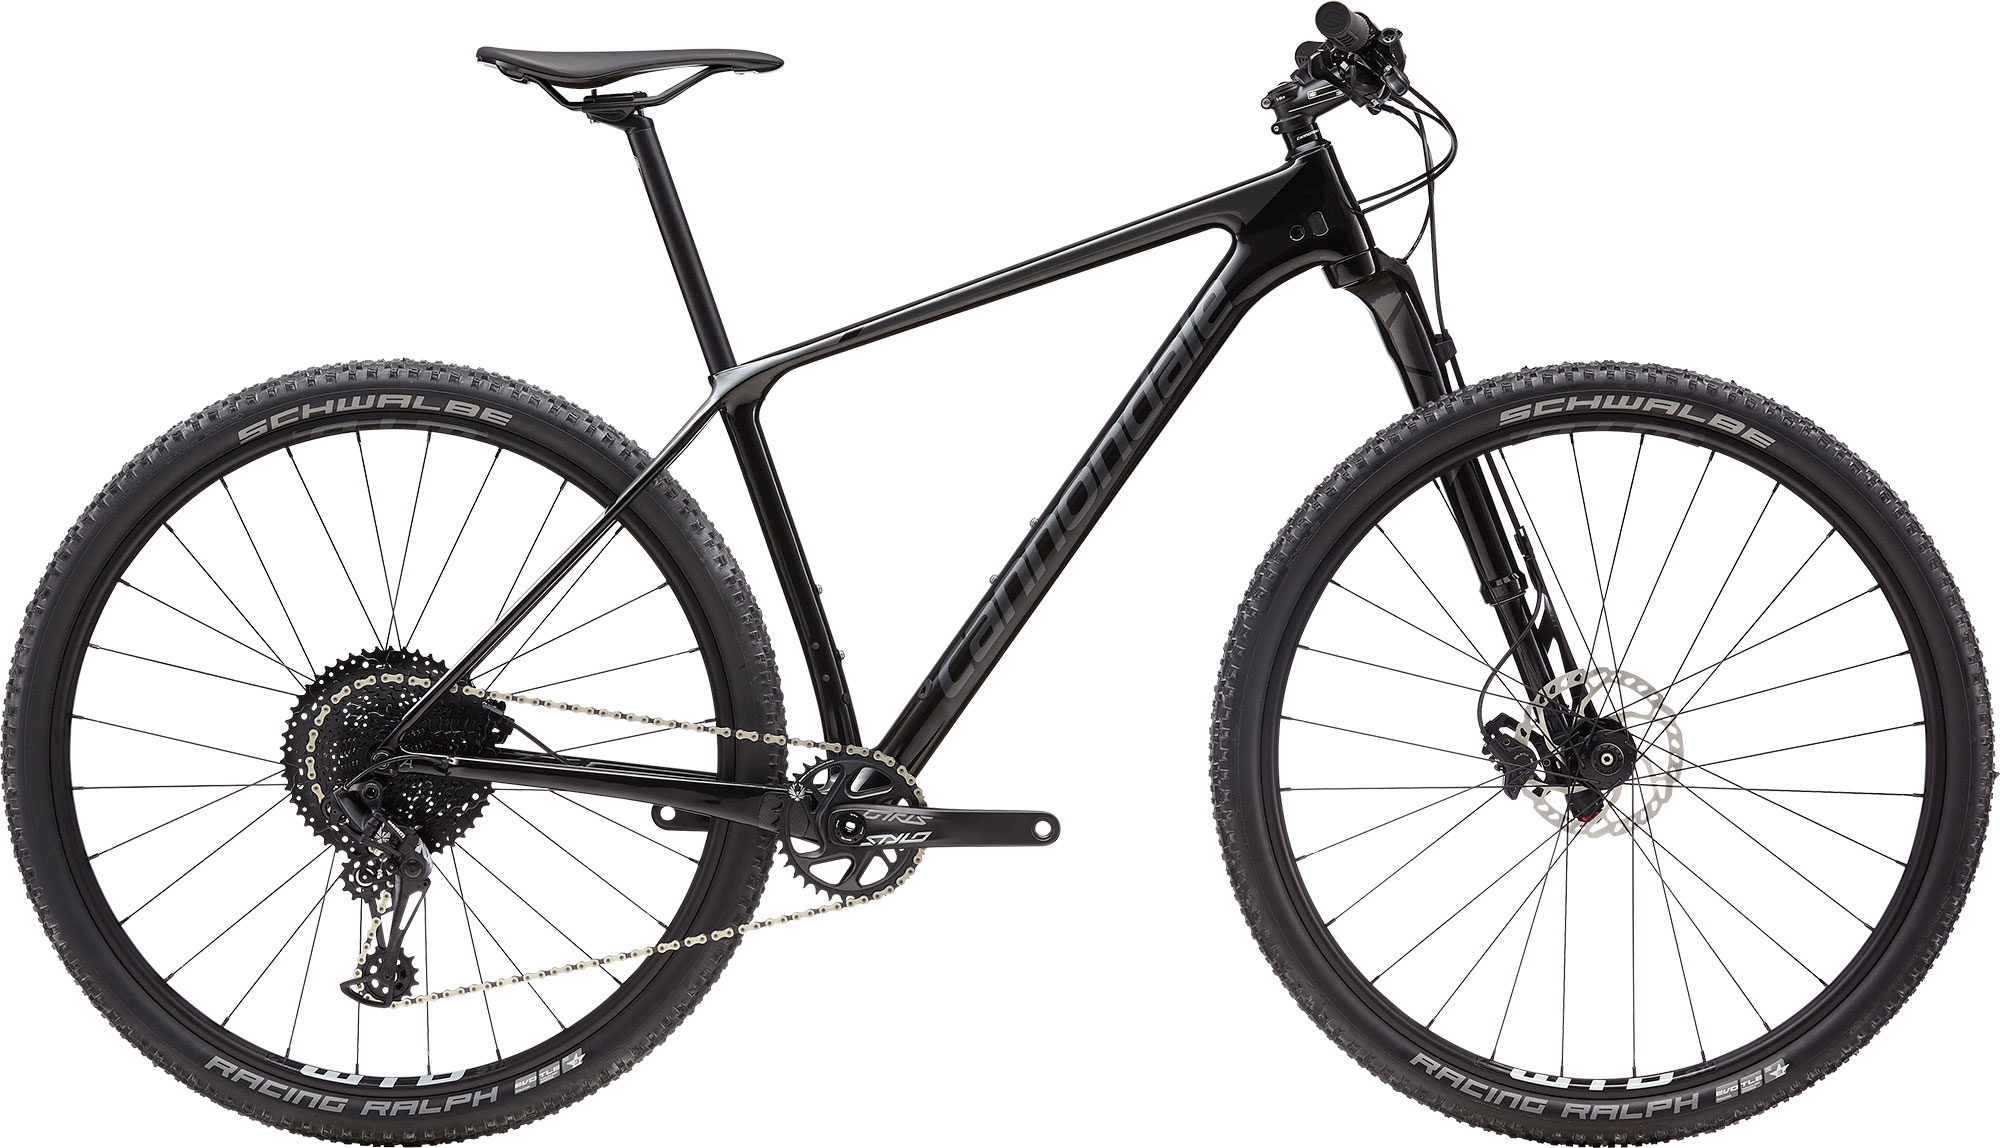 Велосипед 29" Cannondale F-SI Carbon 4 рама - S 2019 GRY серый фото 